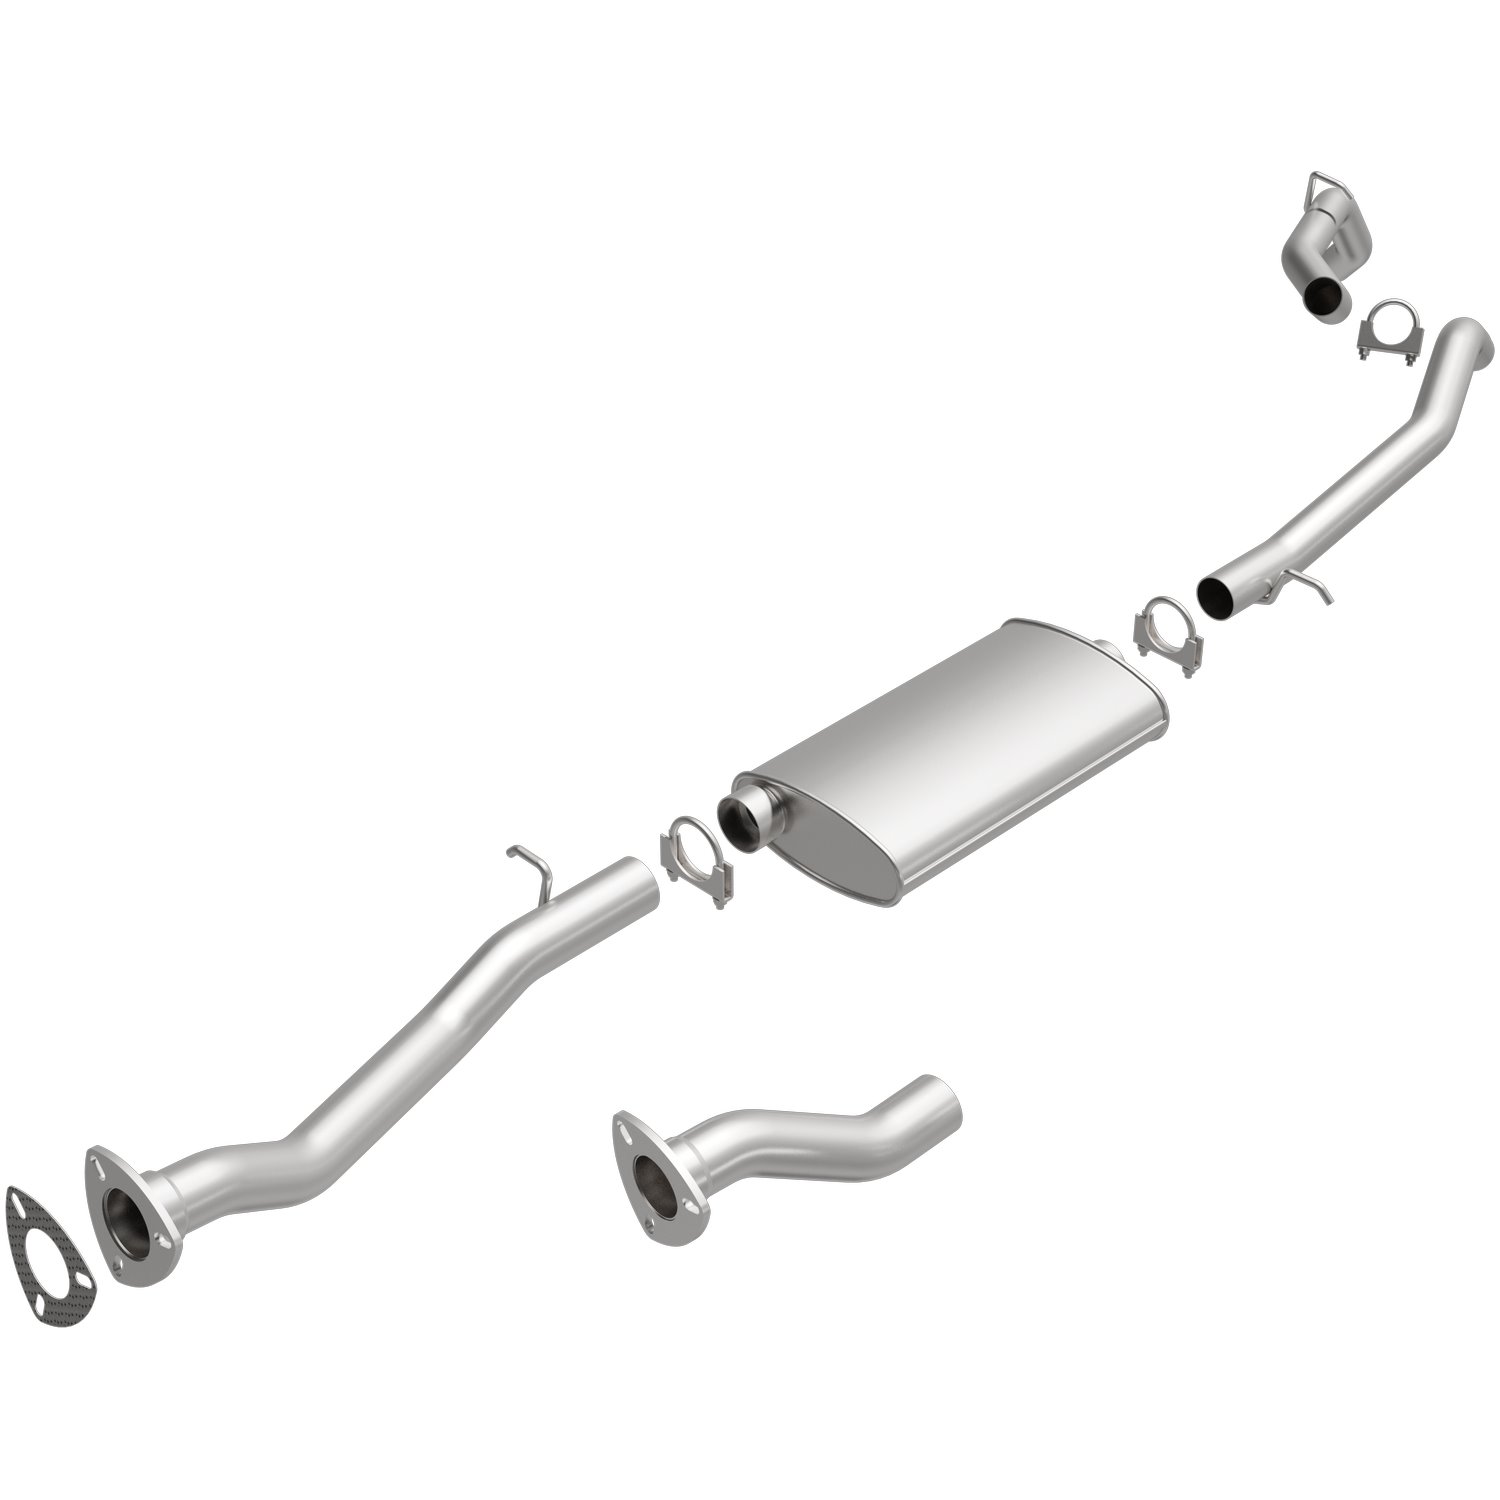 Direct-Fit Exhaust Kit, 1996-2002 GM S10/Sonoma 4.3L